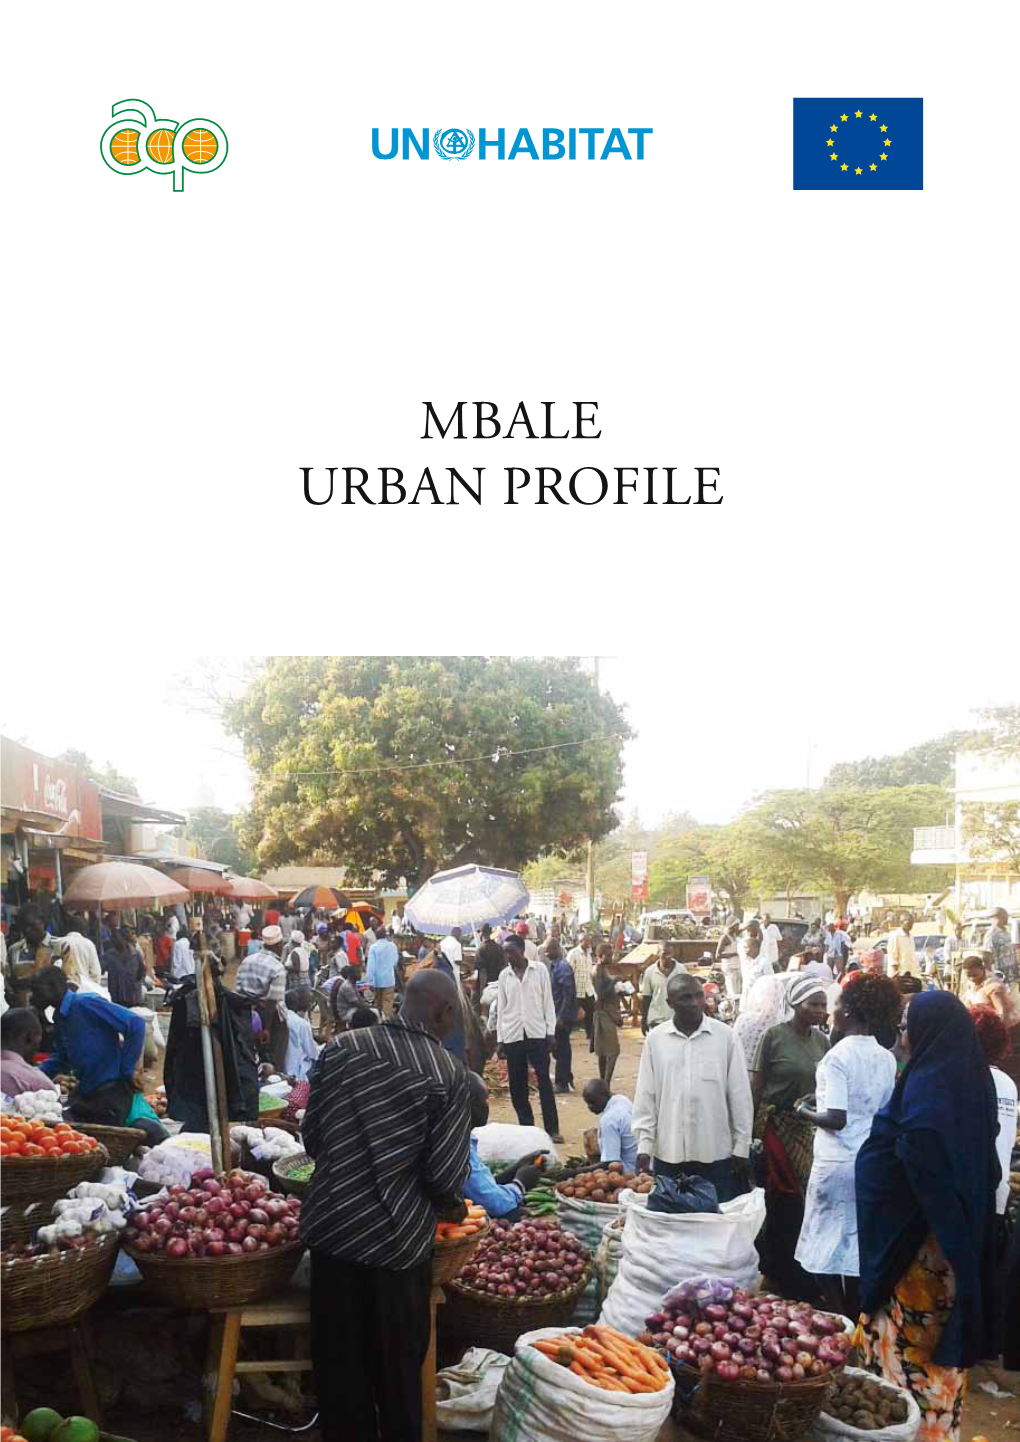 Mbale Urban PROFILE Copyright © United Nations Human Settlements Programme (UN-Habitat), 2011 All Rights Reserved